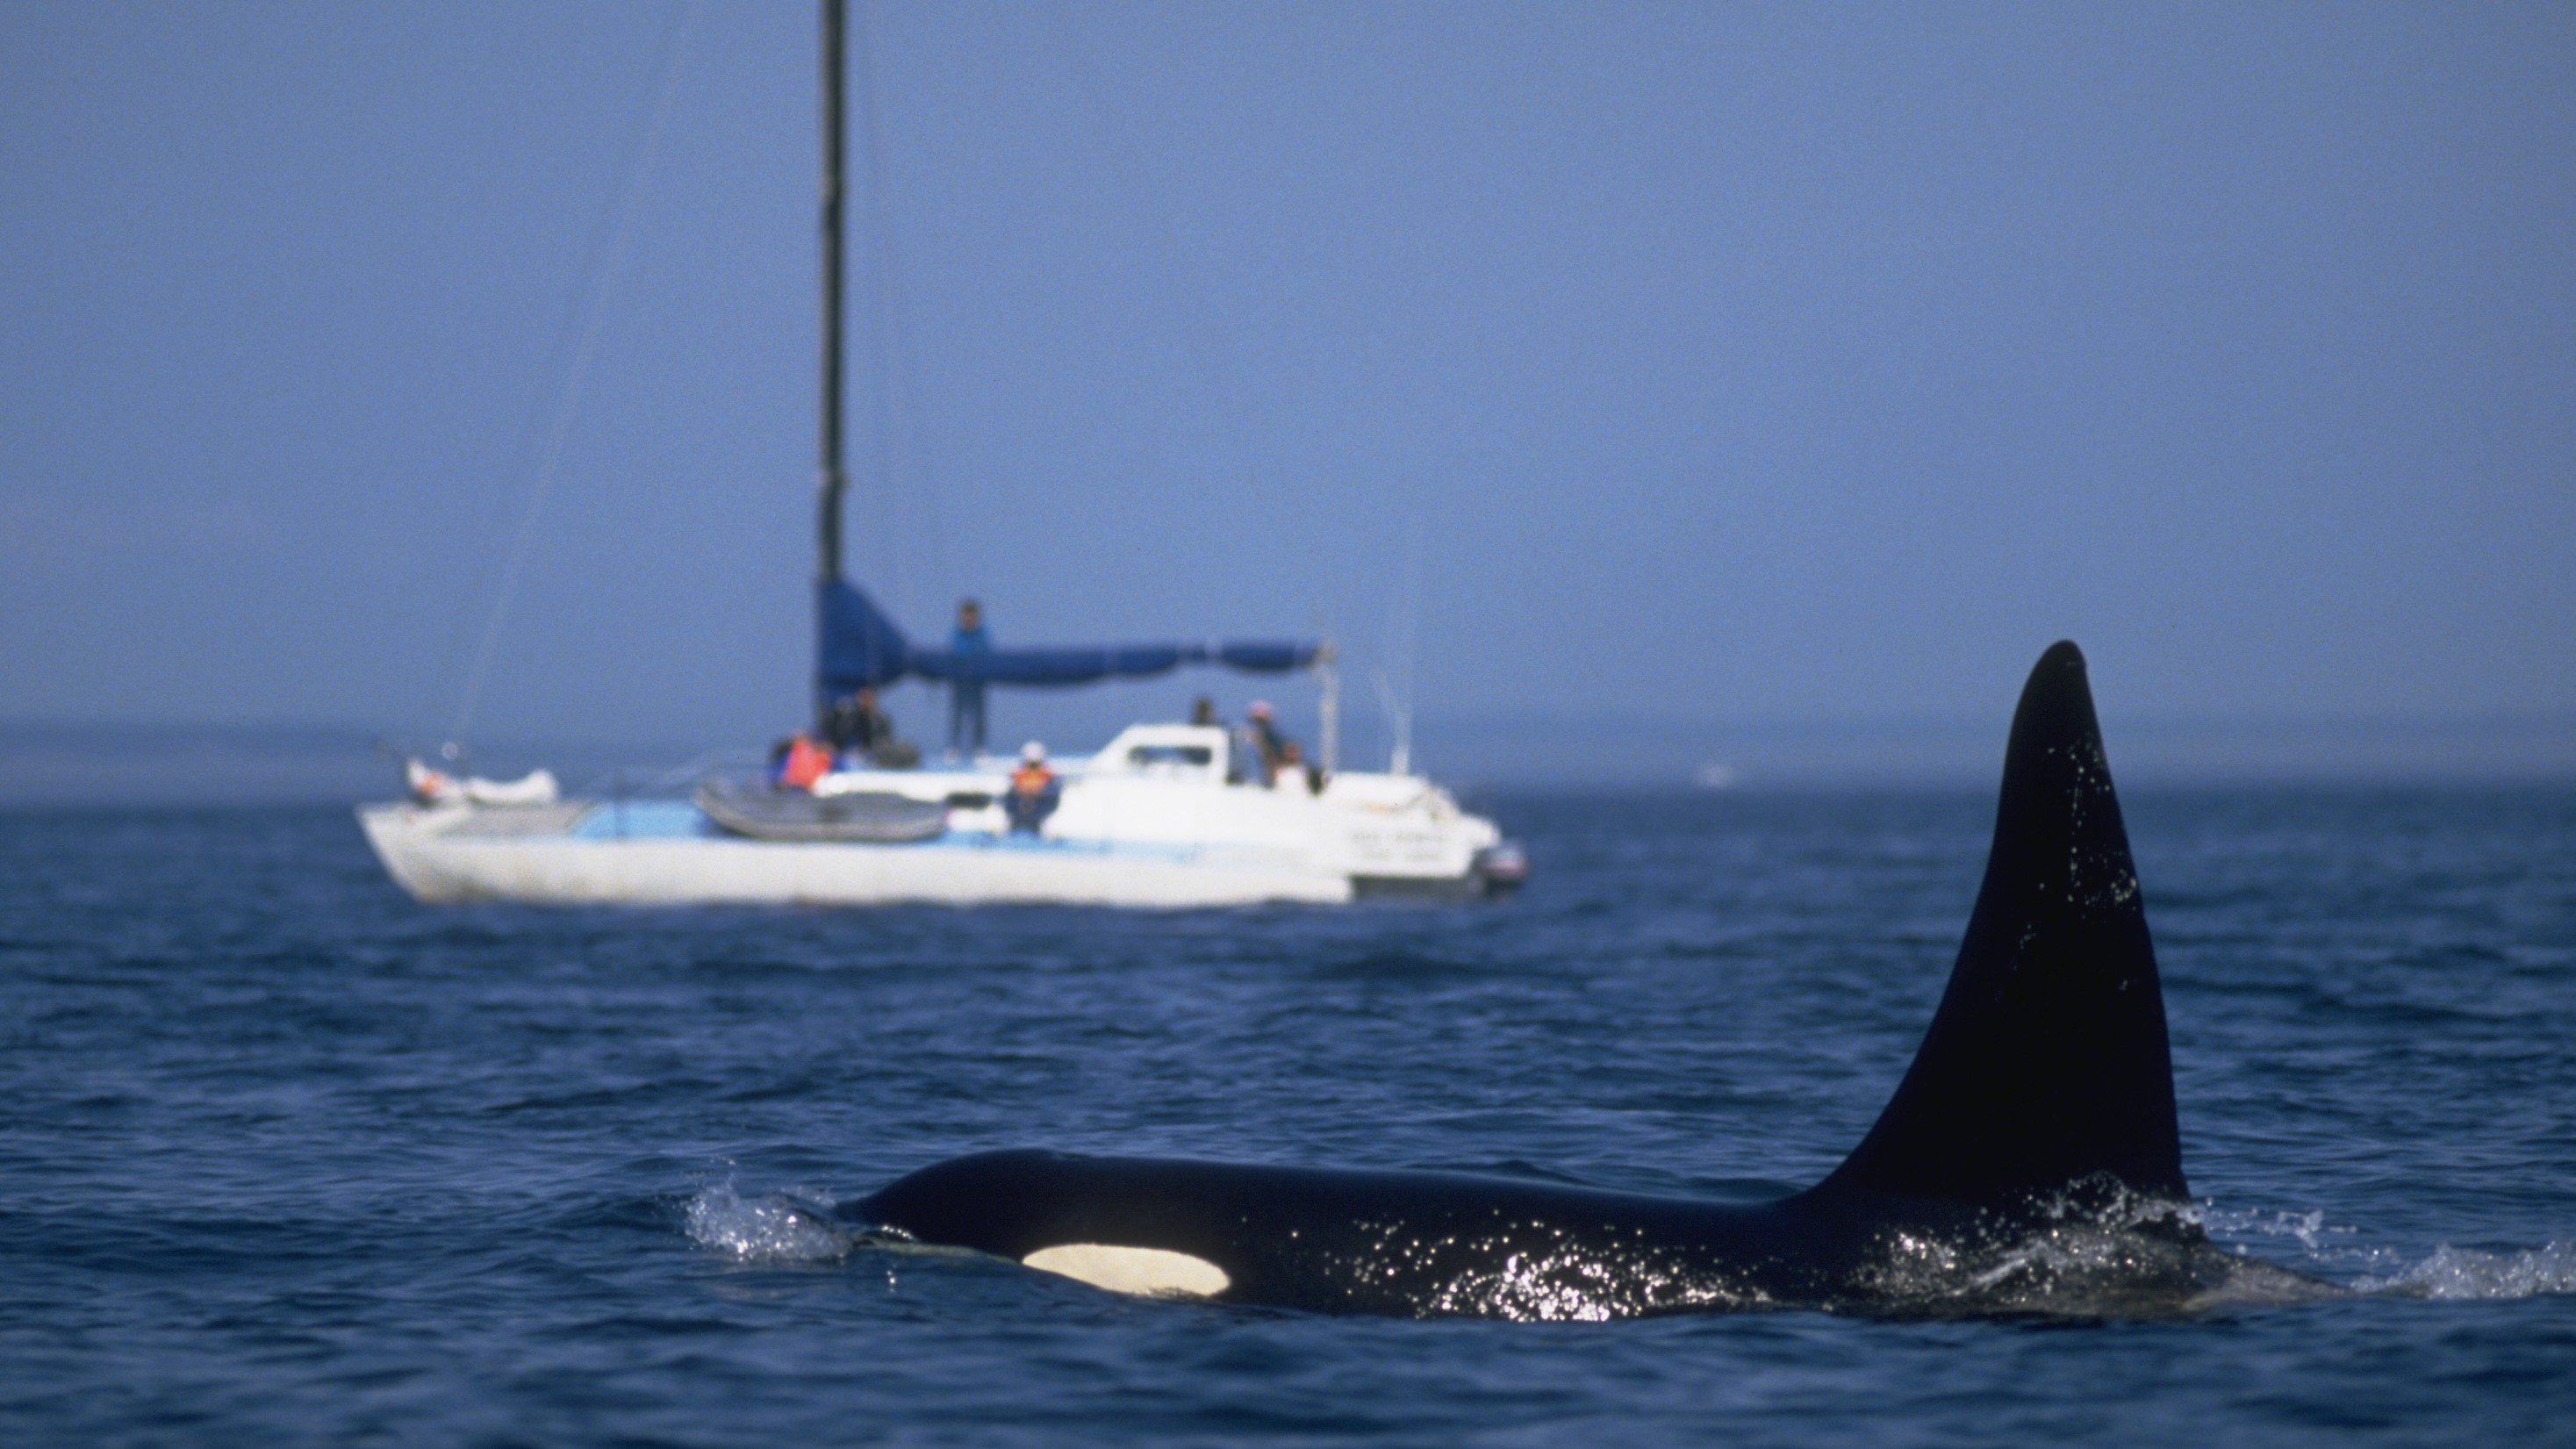  2 young orcas ram sailboat off northern France — 800 miles from 'attack' hotspot 